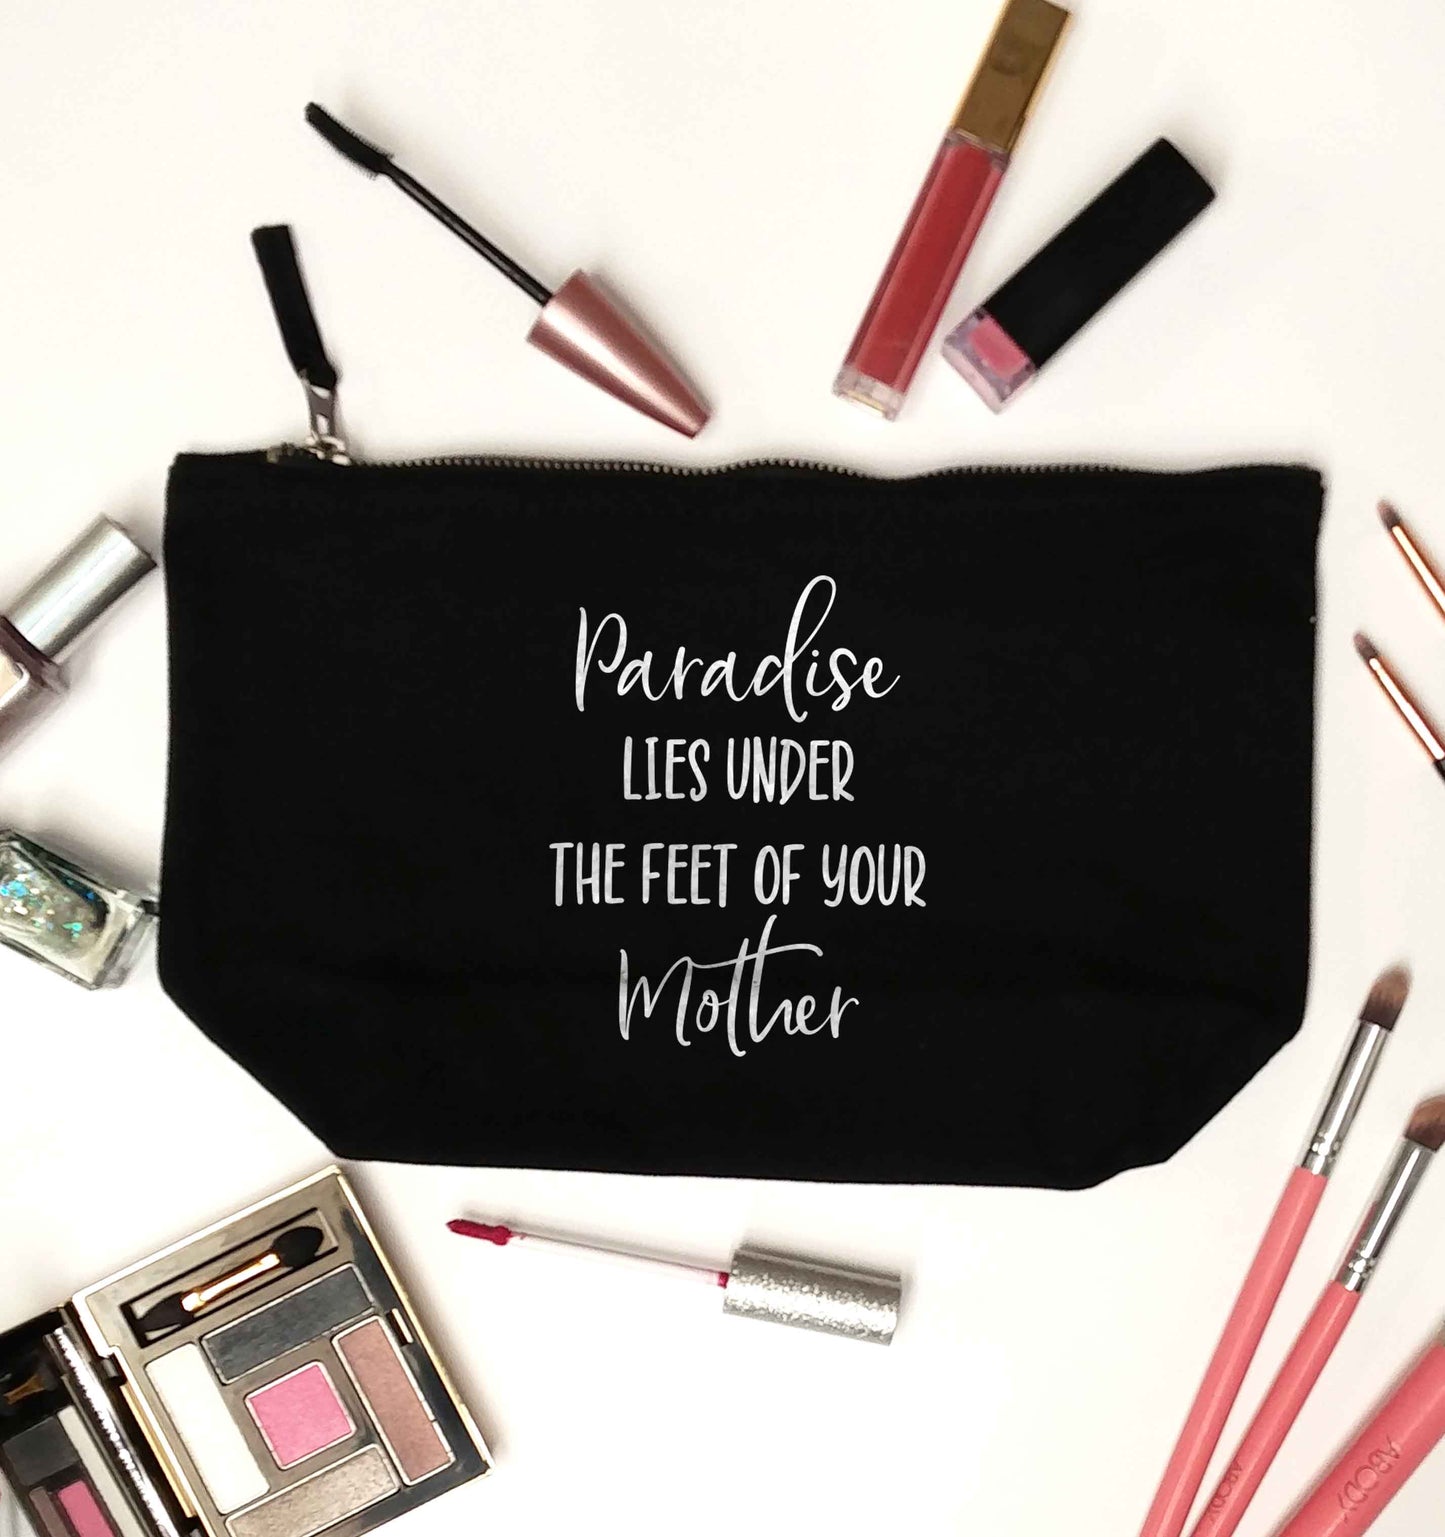 Paradise lies under the feet of your mother black makeup bag